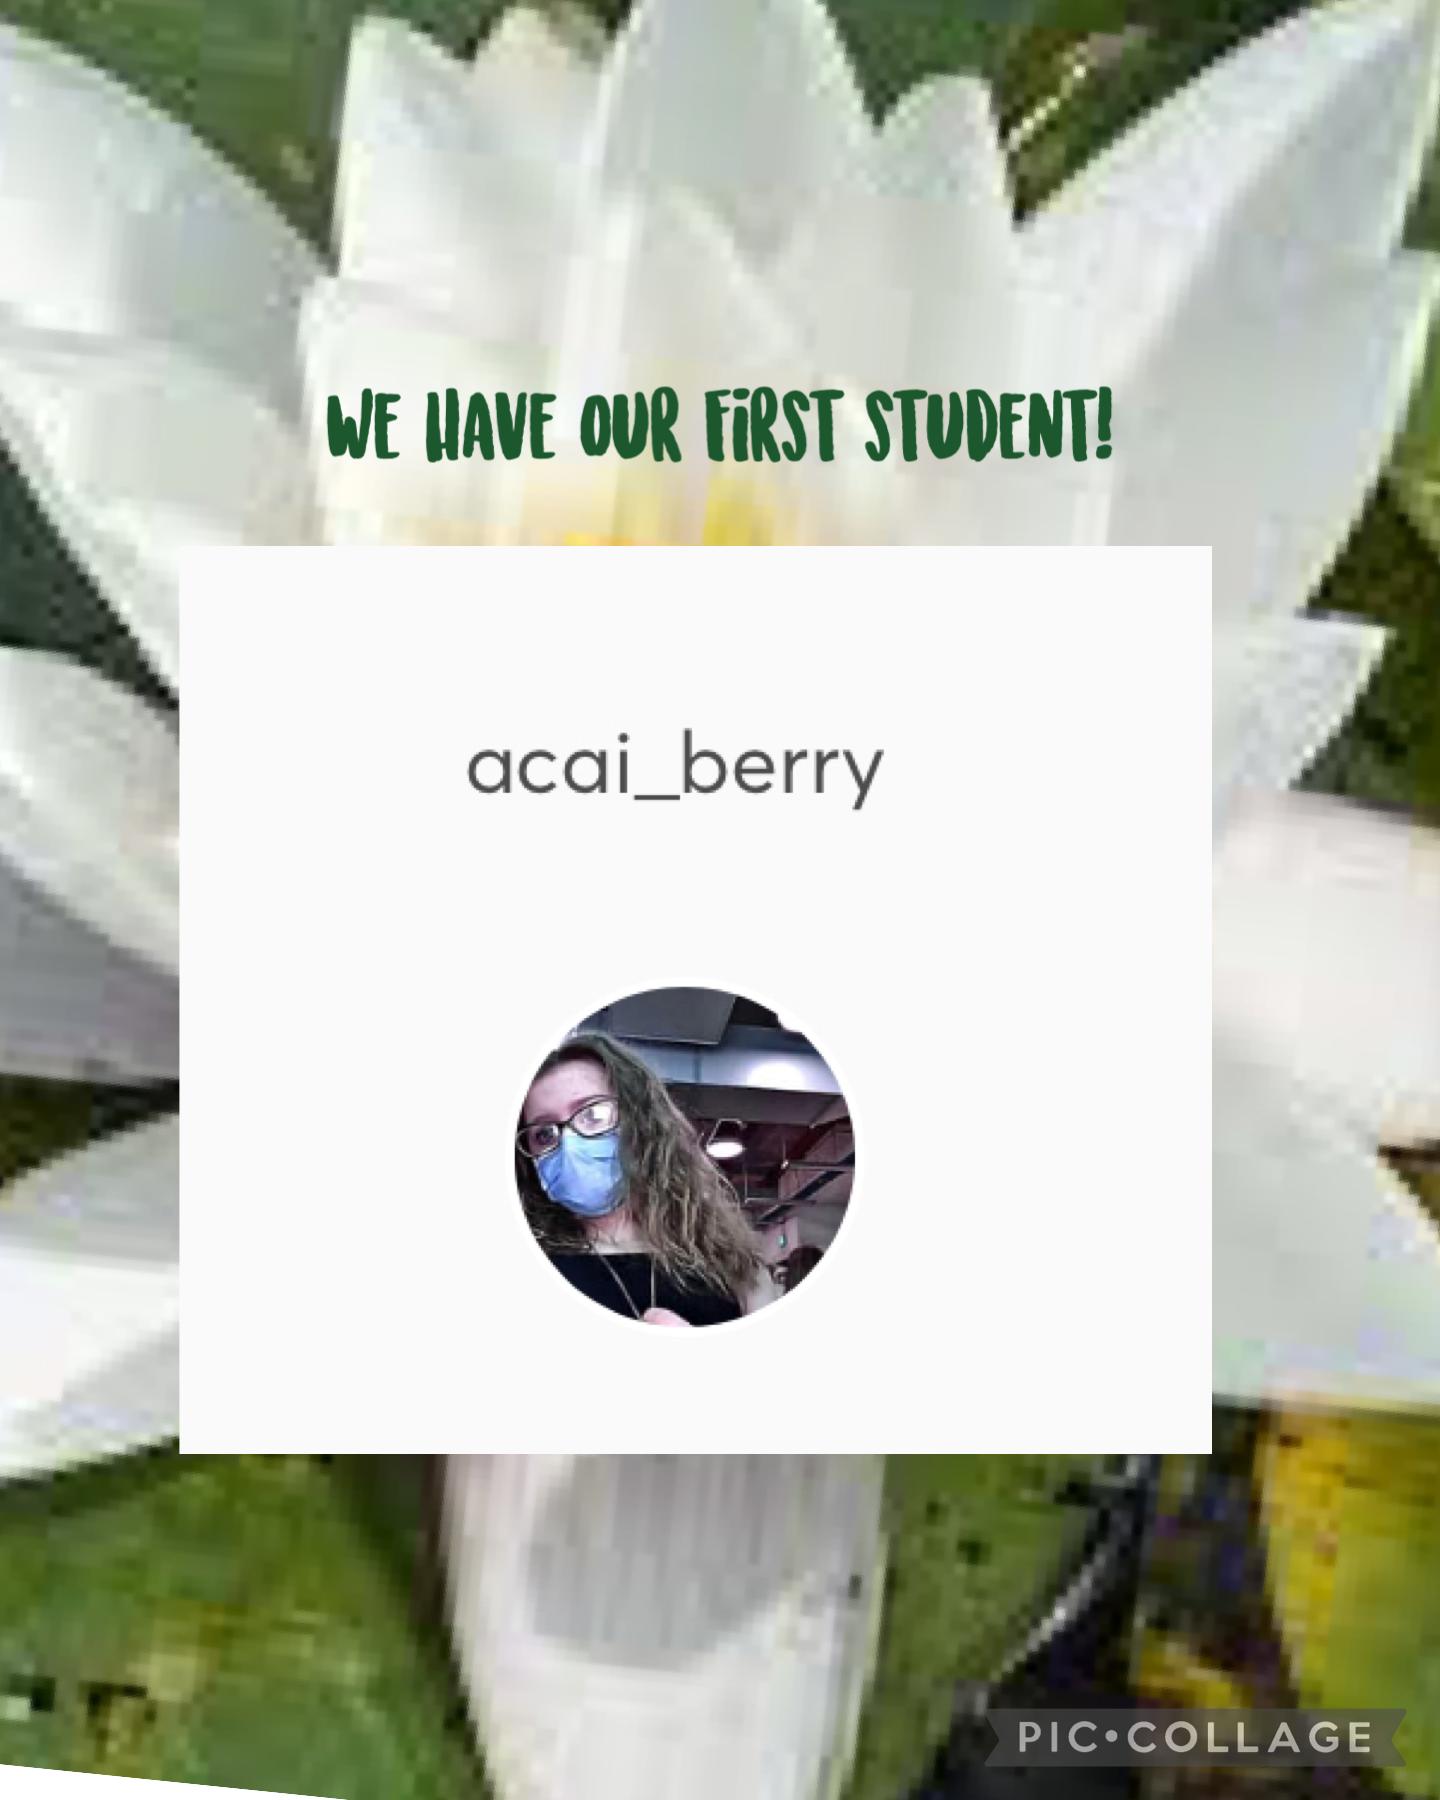 Thank you açai_berry you are a student pls let me know what your time zone is tysm